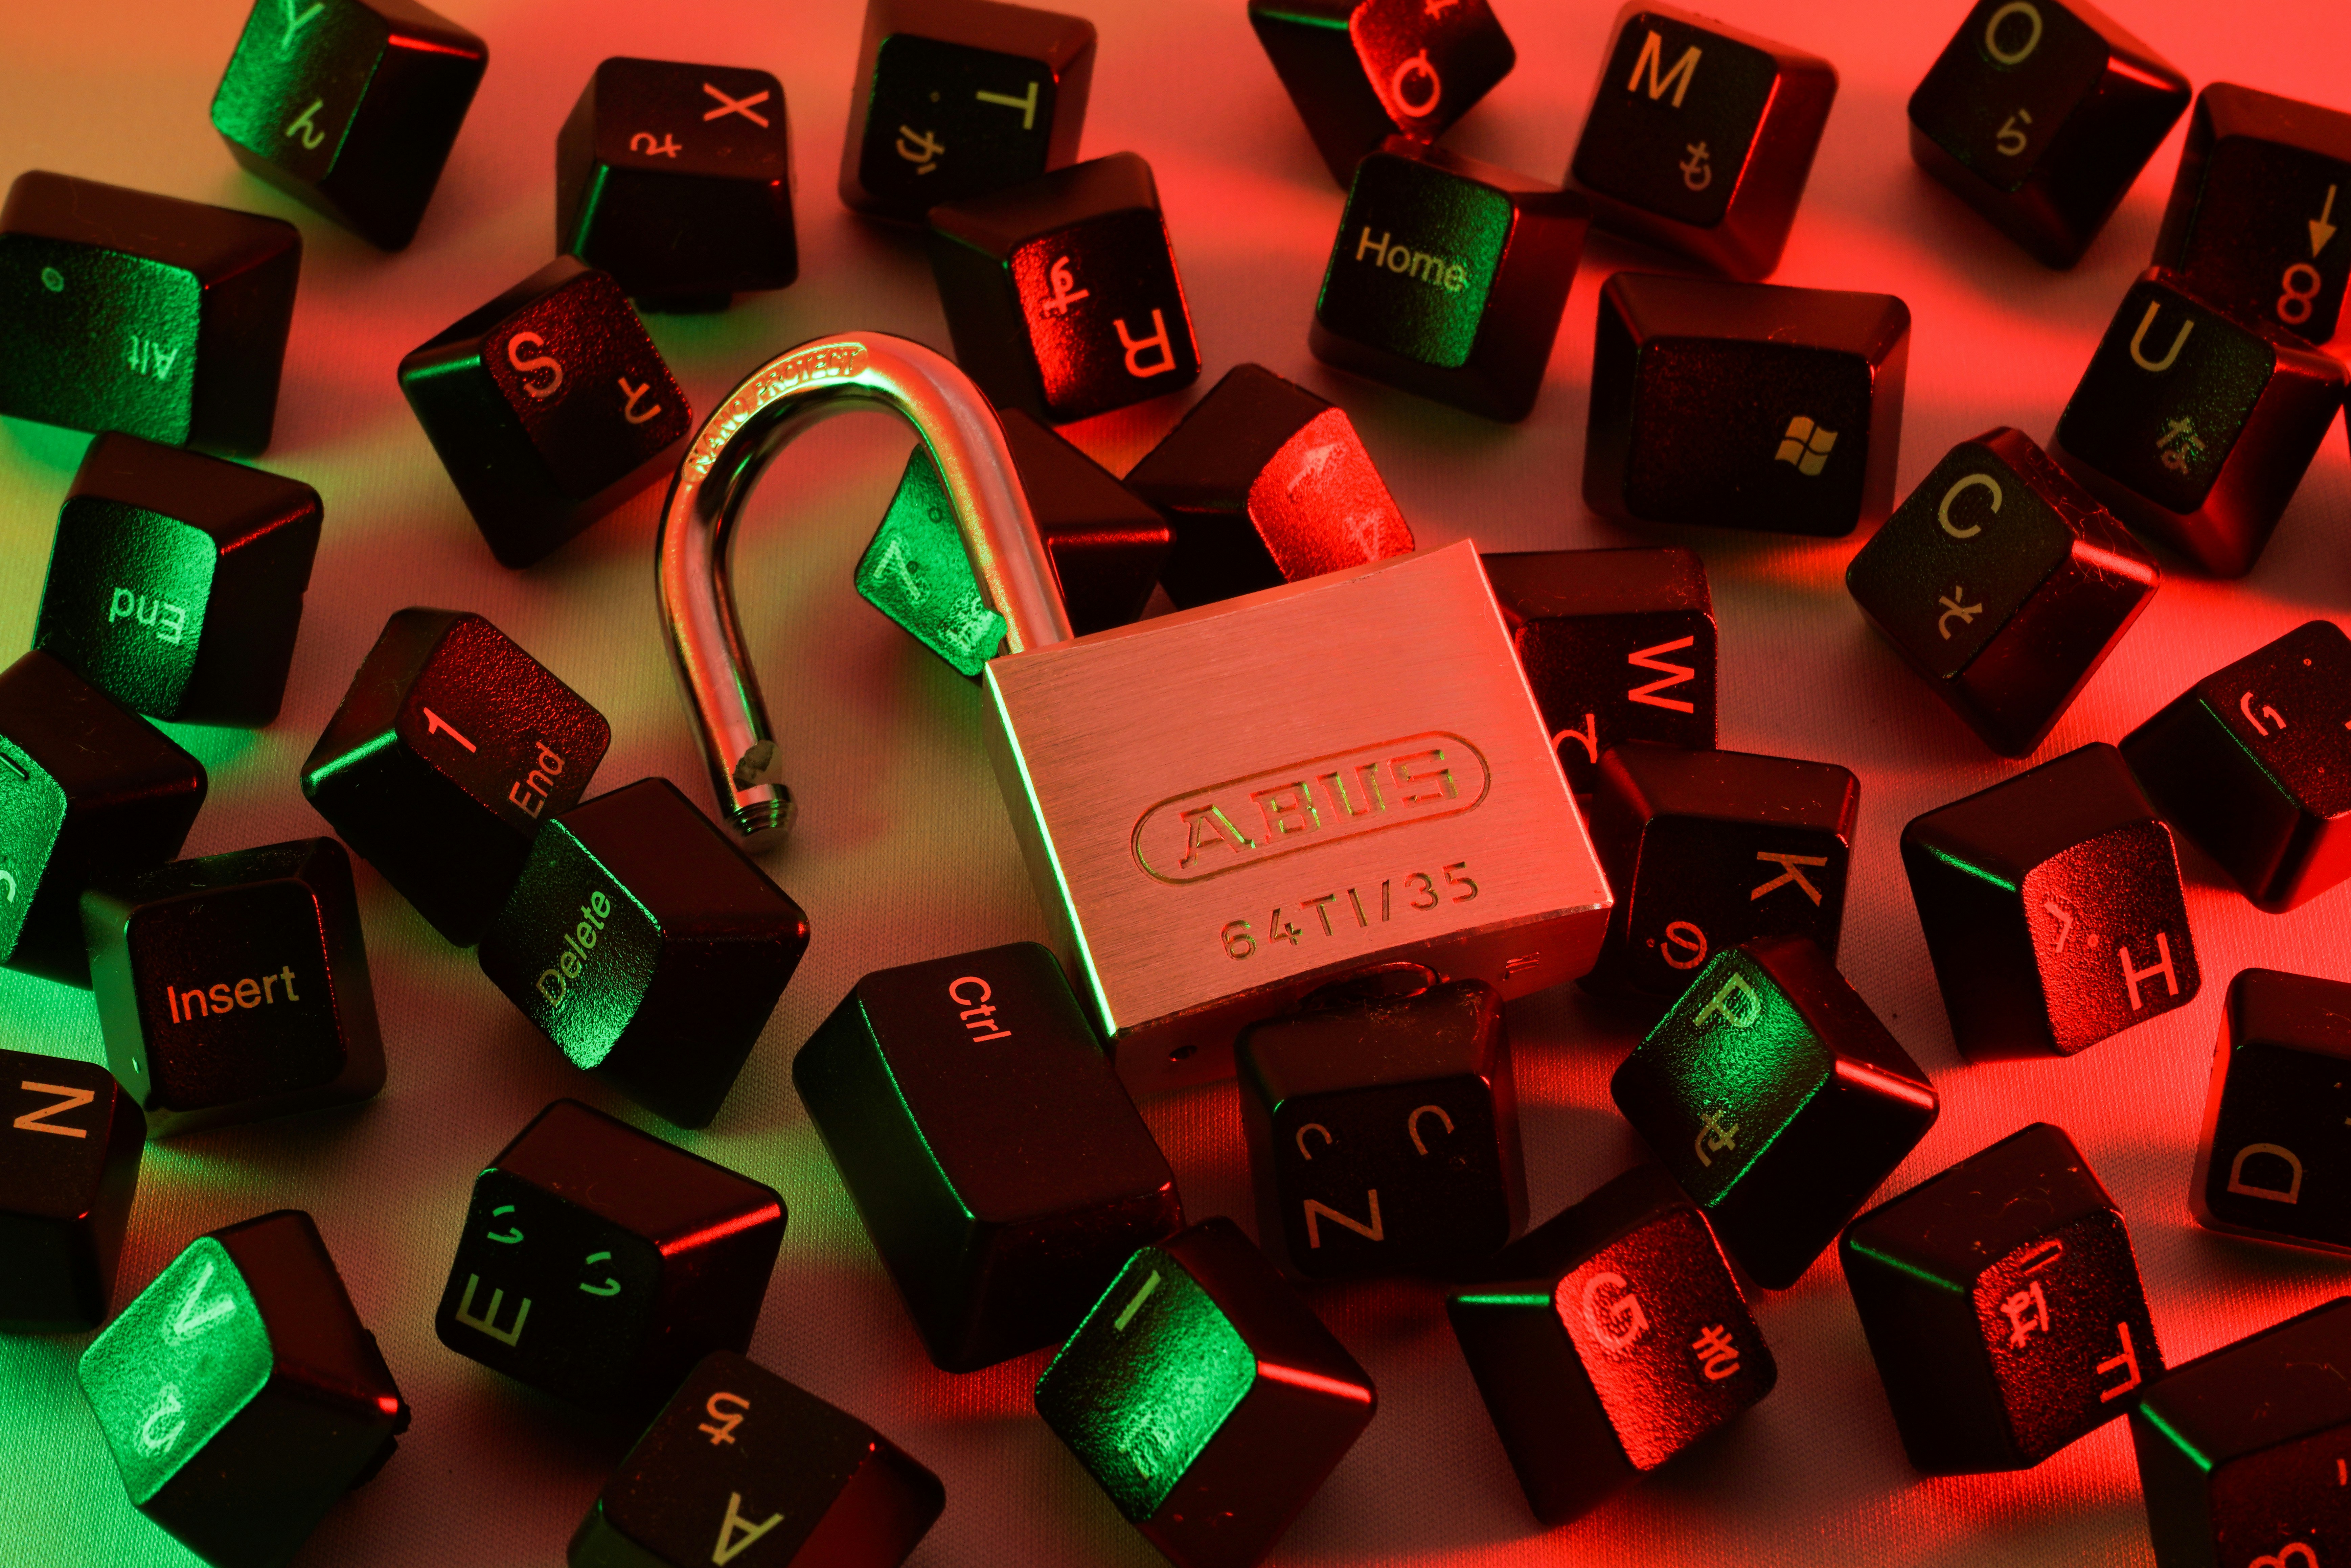 Padlock on scattered keyboard keys highlighting cybersecurity, representing best practices for securing Python applications in web development and data analysis.